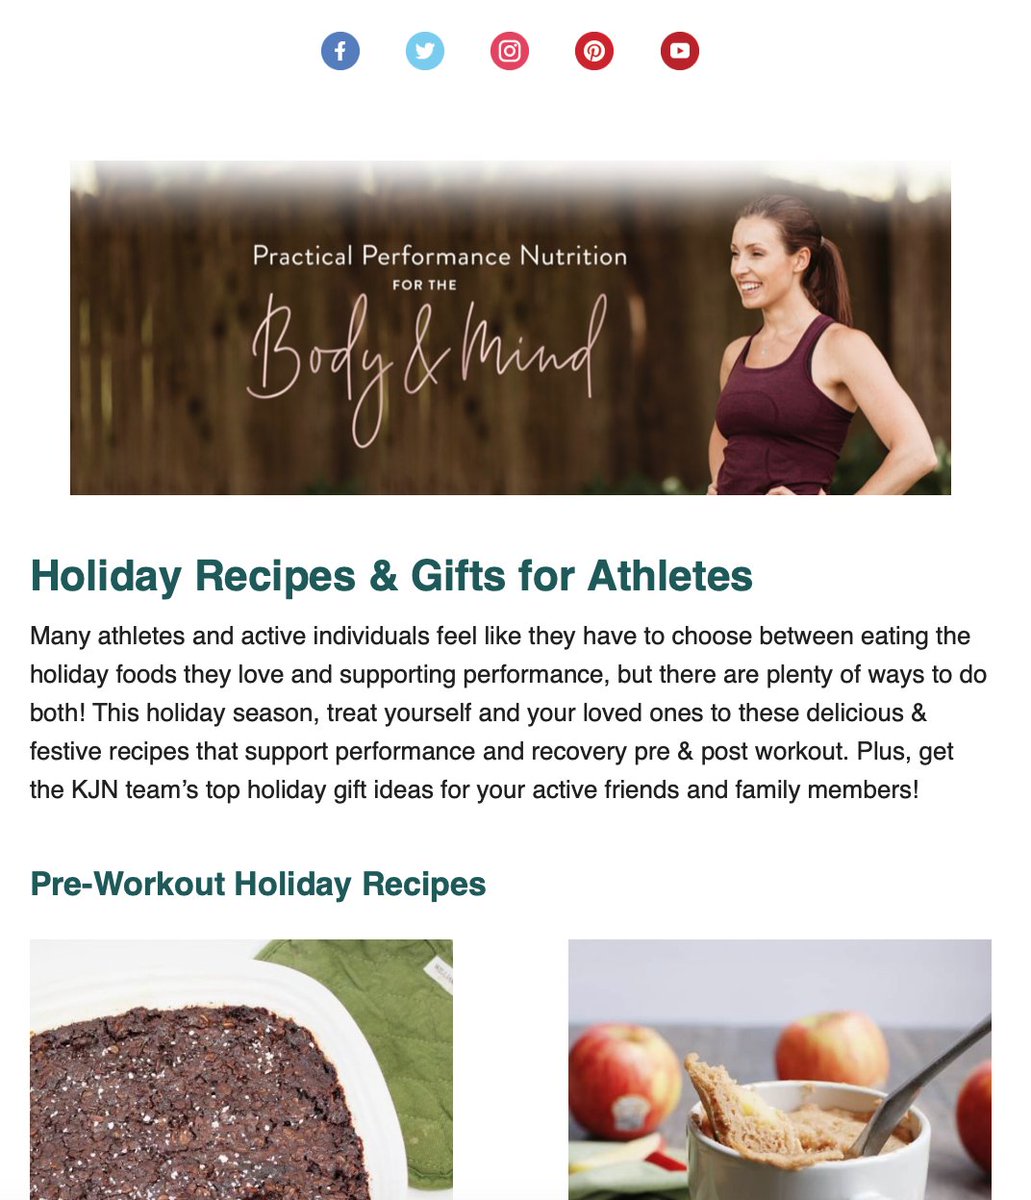 Looking to support performance while enjoying the flavors of the season? In our latest newsletter we shared festive and pre & post workout recipes, plus the KJN team’s top holiday gift ideas for athletes and active individuals. mailchi.mp/4122e4bae1f4/h…